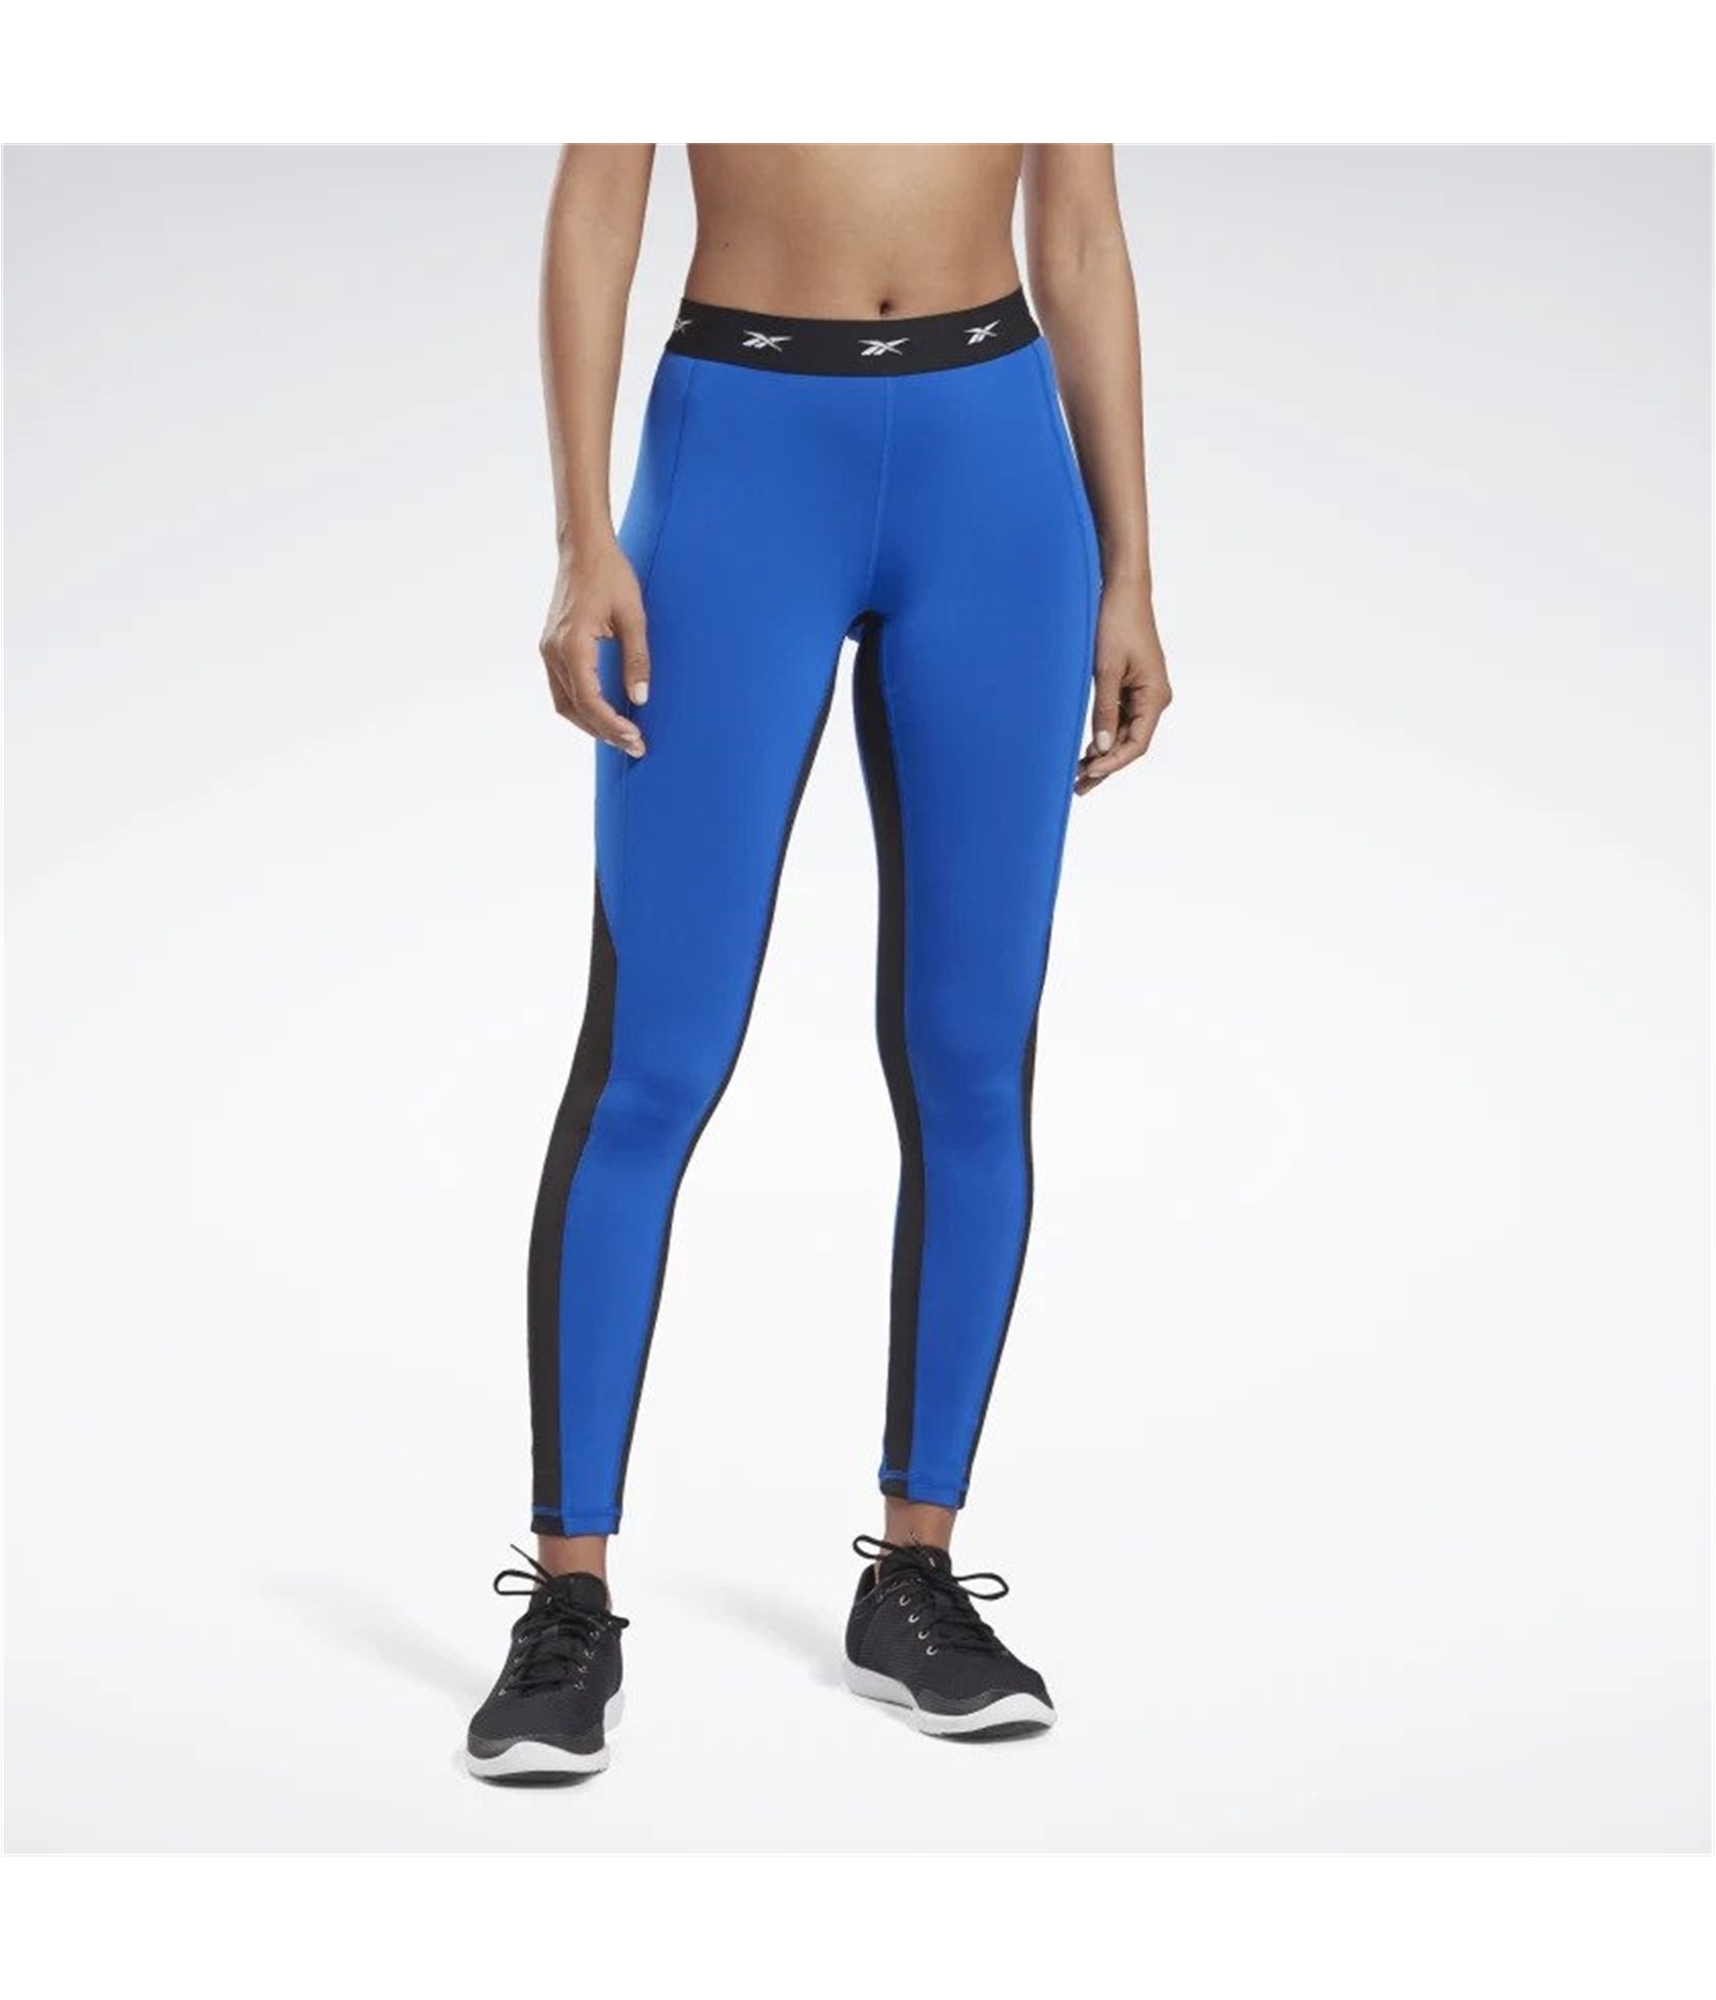 Buy a Womens Reebok Highrise Compression Athletic Pants Online | TagsWeekly.com